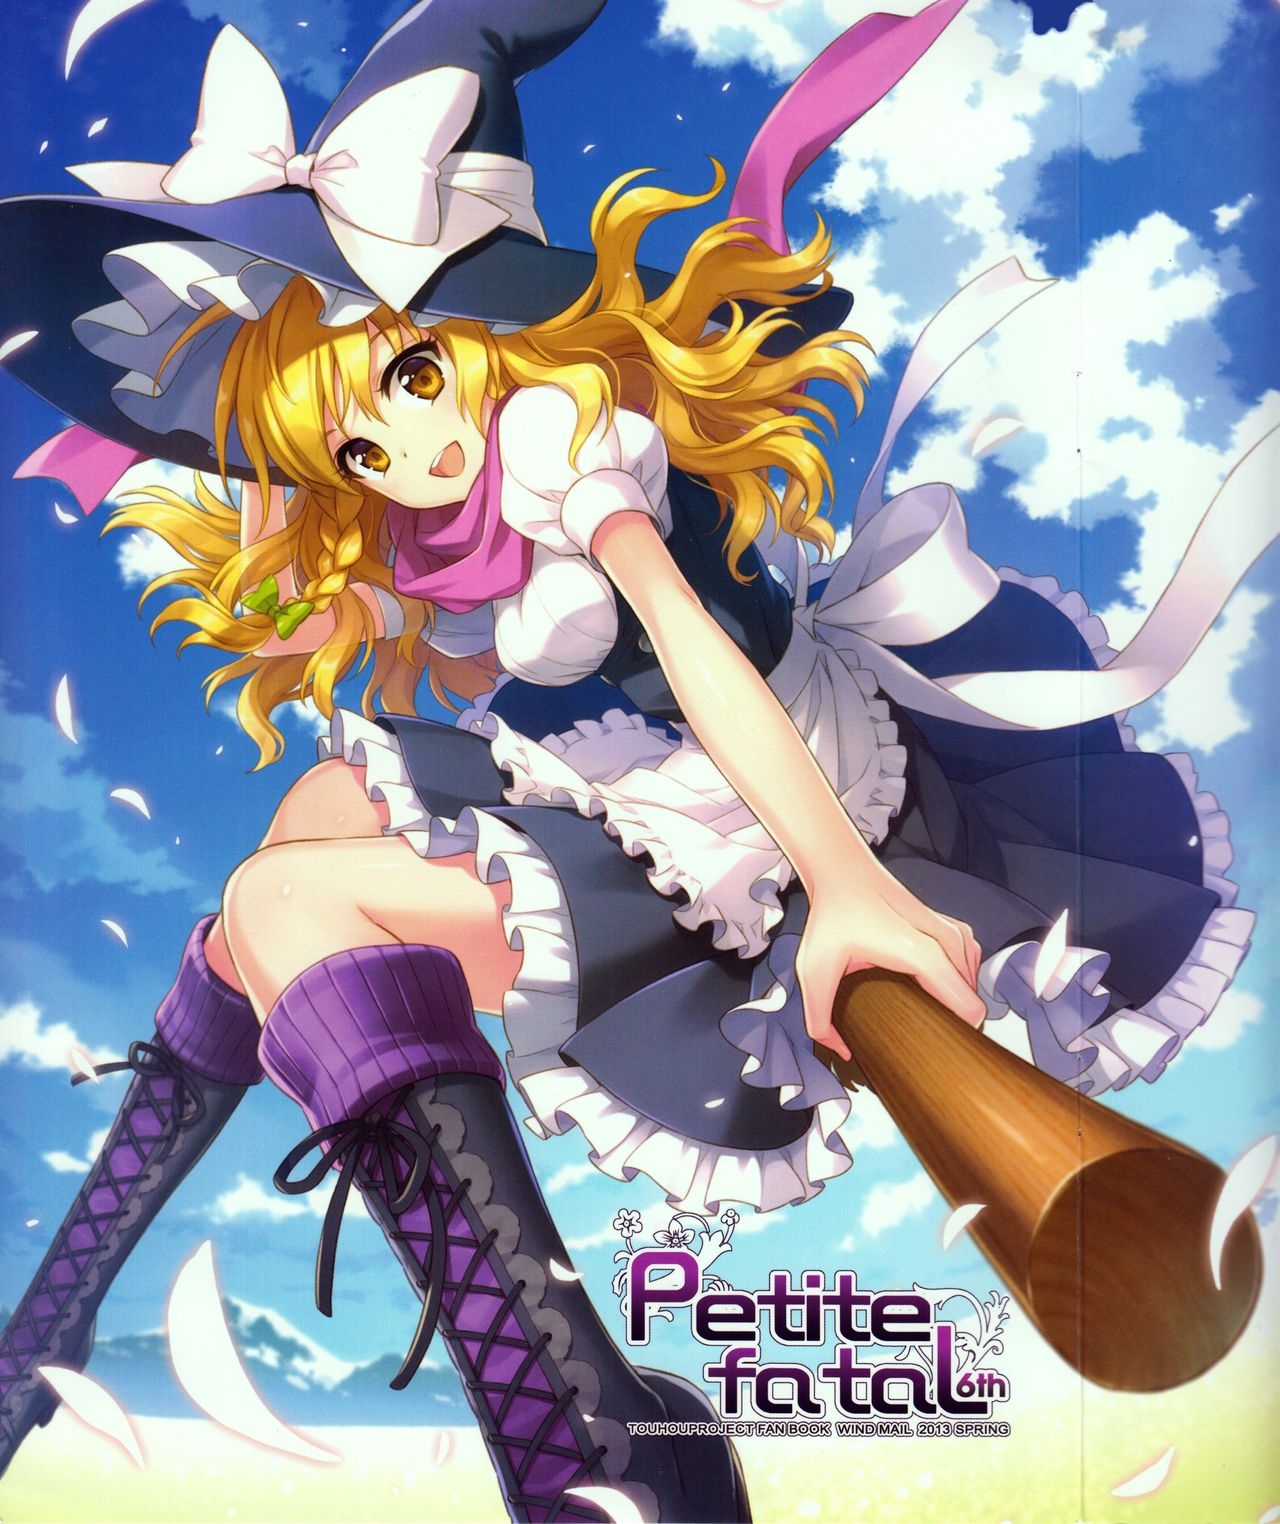 (Reitaisai 10) [WIND MAIL (AN2A)] Petite Fatal 6th (Touhou Project) 0